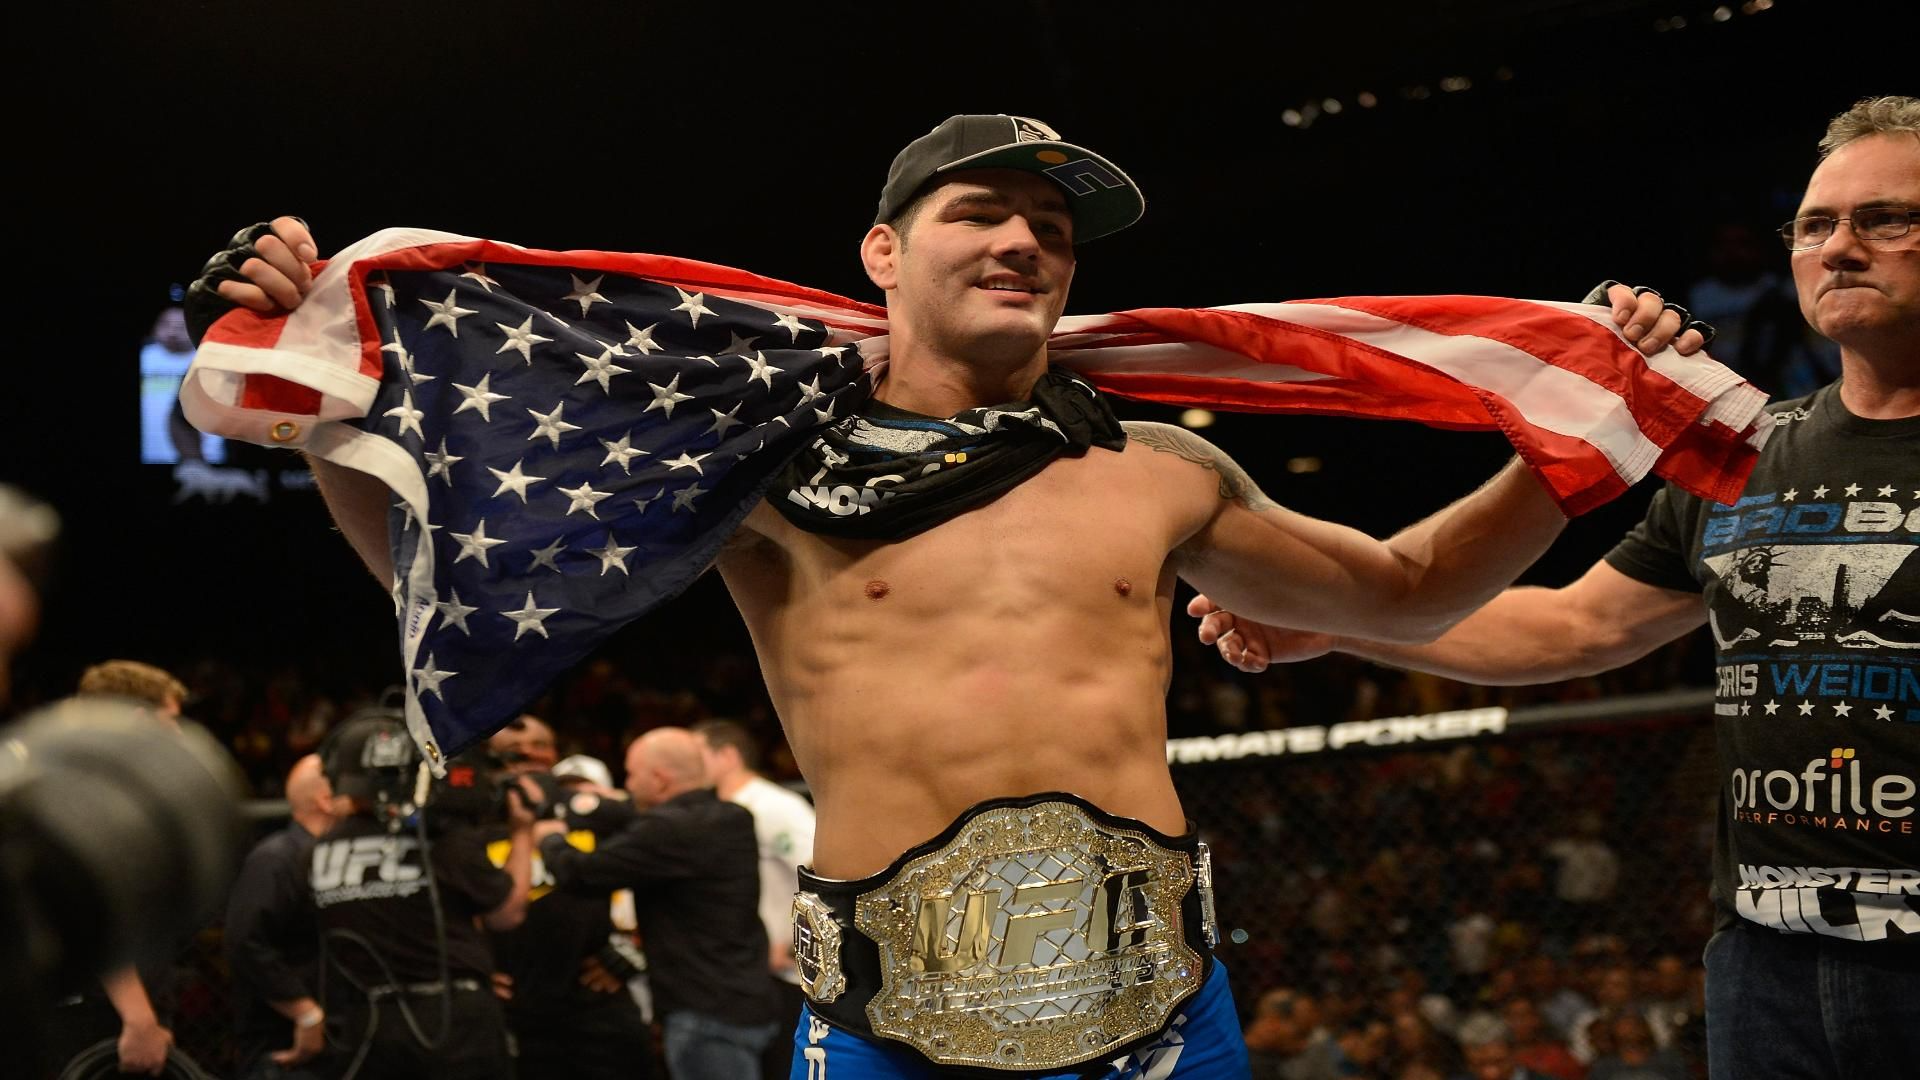 Weidman: My Goal is to Get the Fight with UFC Champion Adesanya